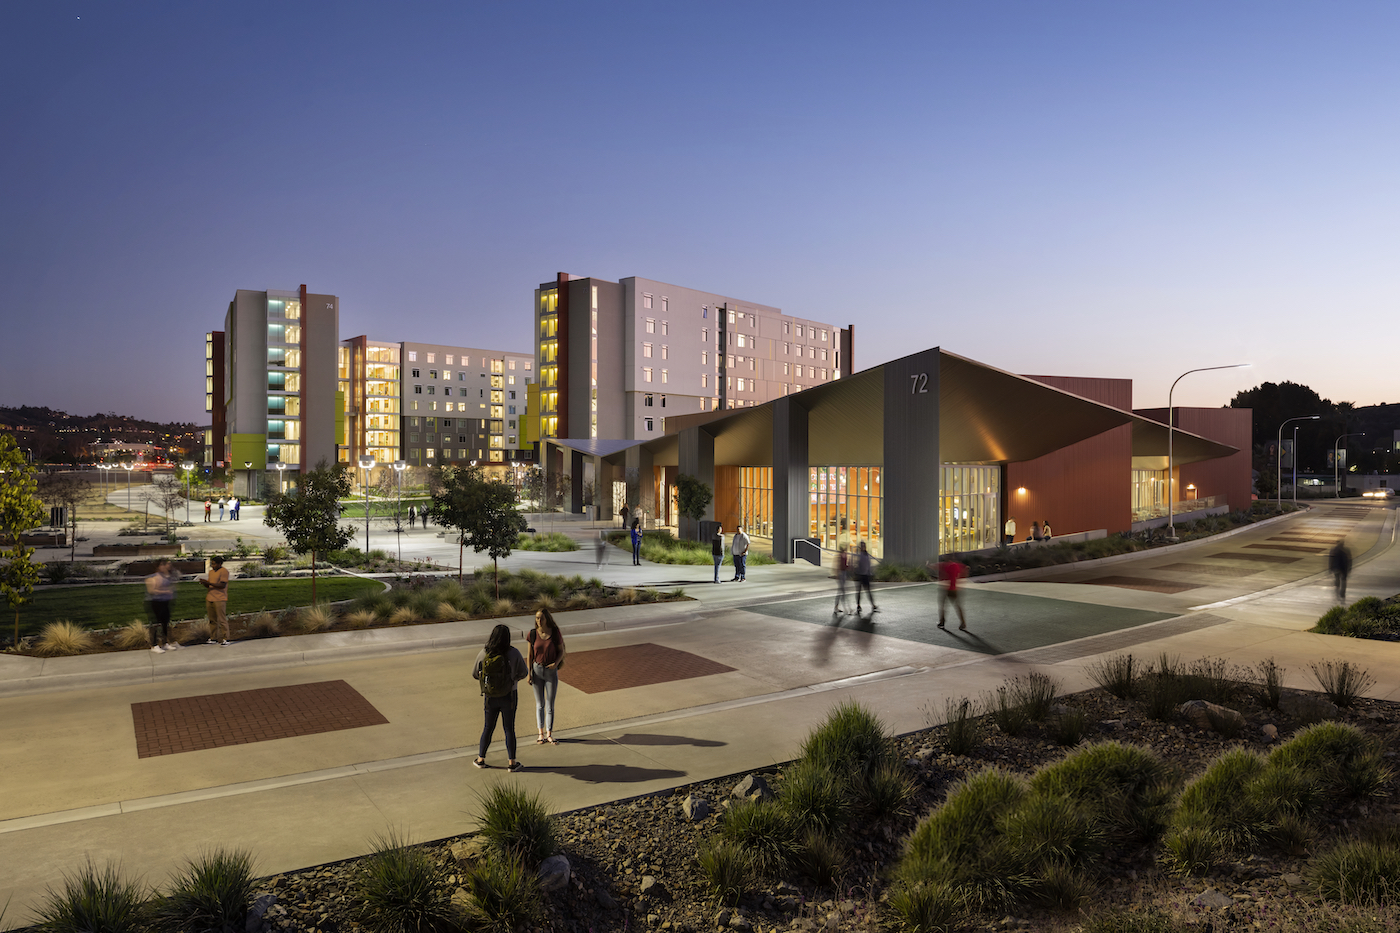 HOUSING AND DINING COMMONS at California State Polytechnic University–Pomona 2 2020 student housing report 